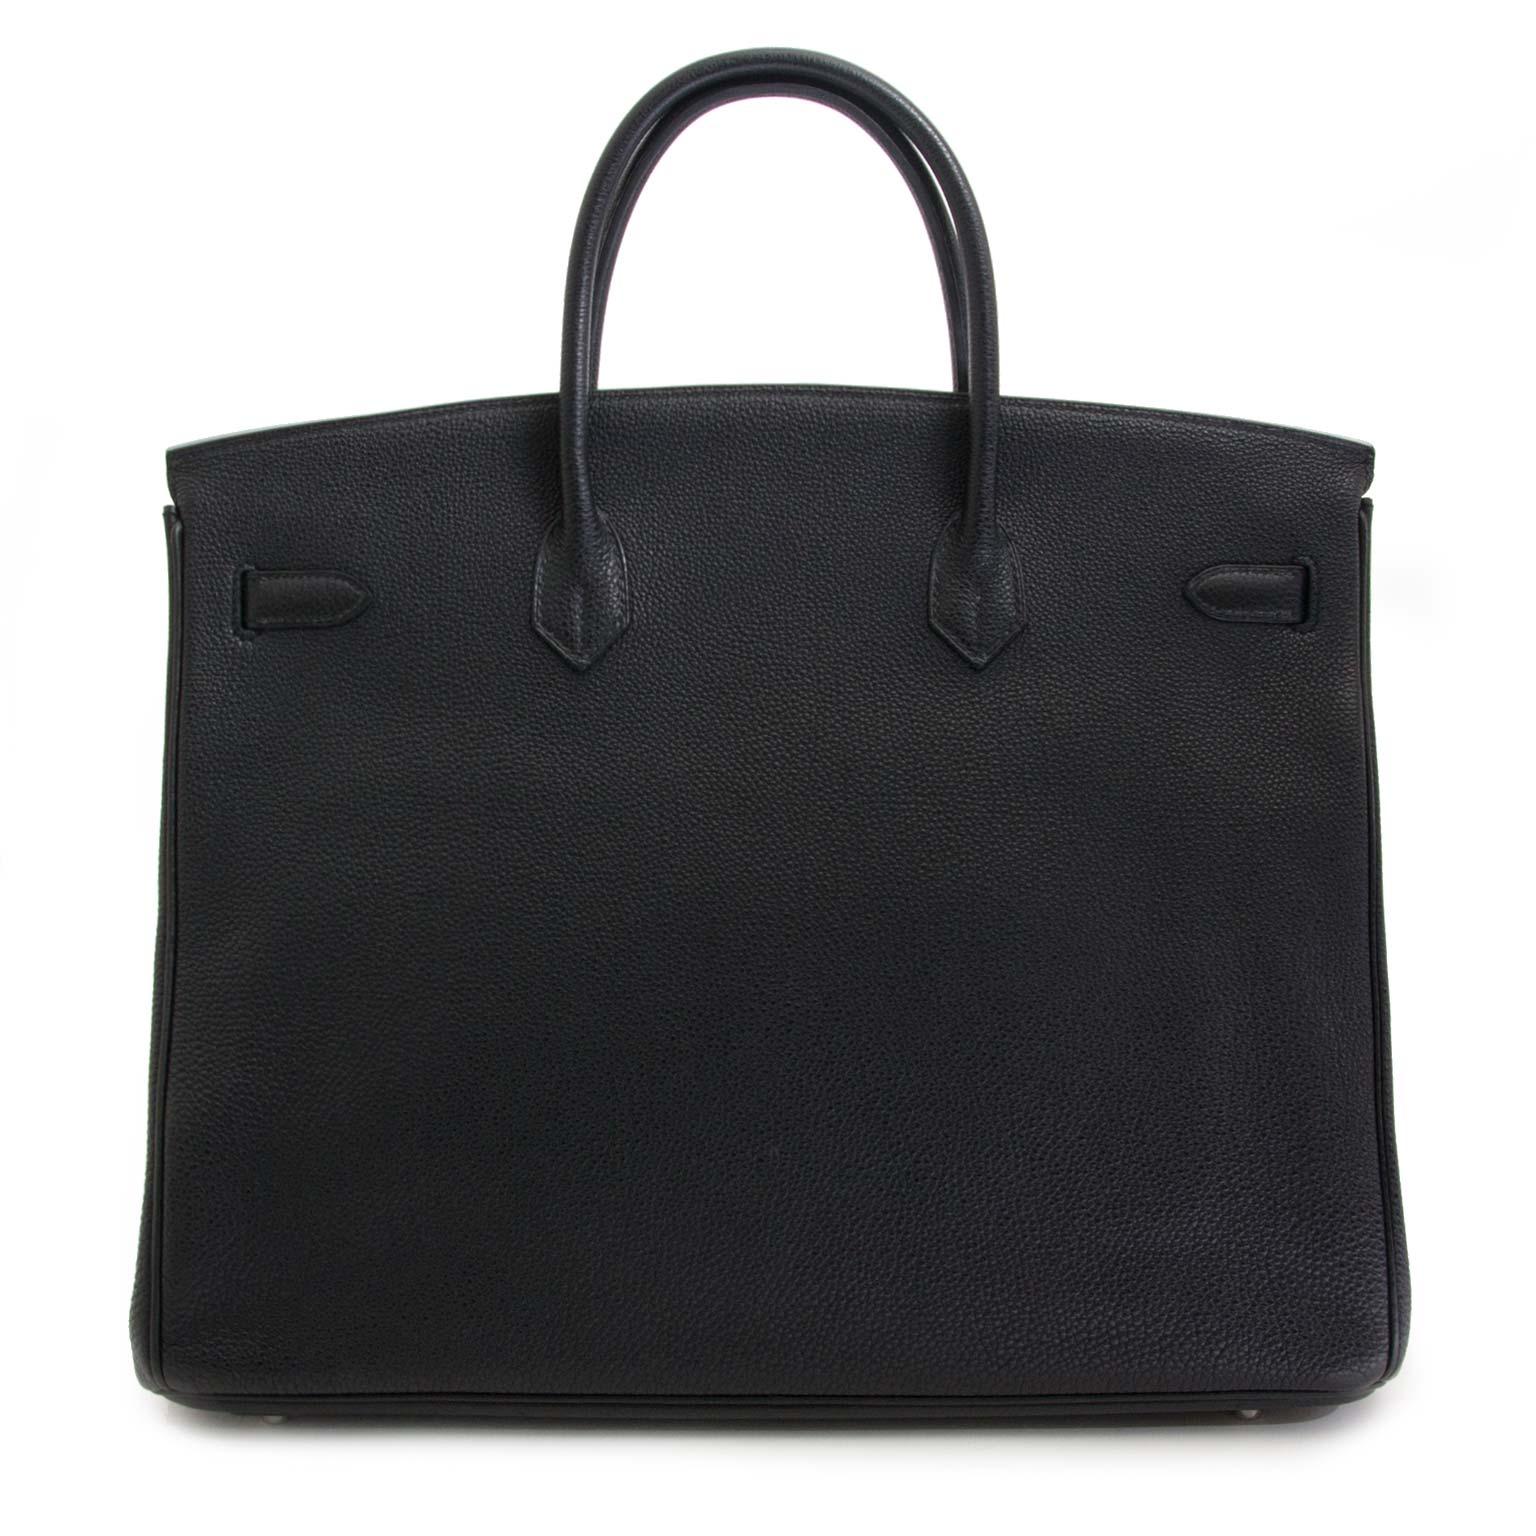 Hermès Birkin 40cm Black Togo PHW

Who doesn't love black. Other than gold, the other all-time colour from Hermès is black.

Suited for all occasions, this is a timeless fashion colour.

The beauty of Togo leather is appreciated as it naturally